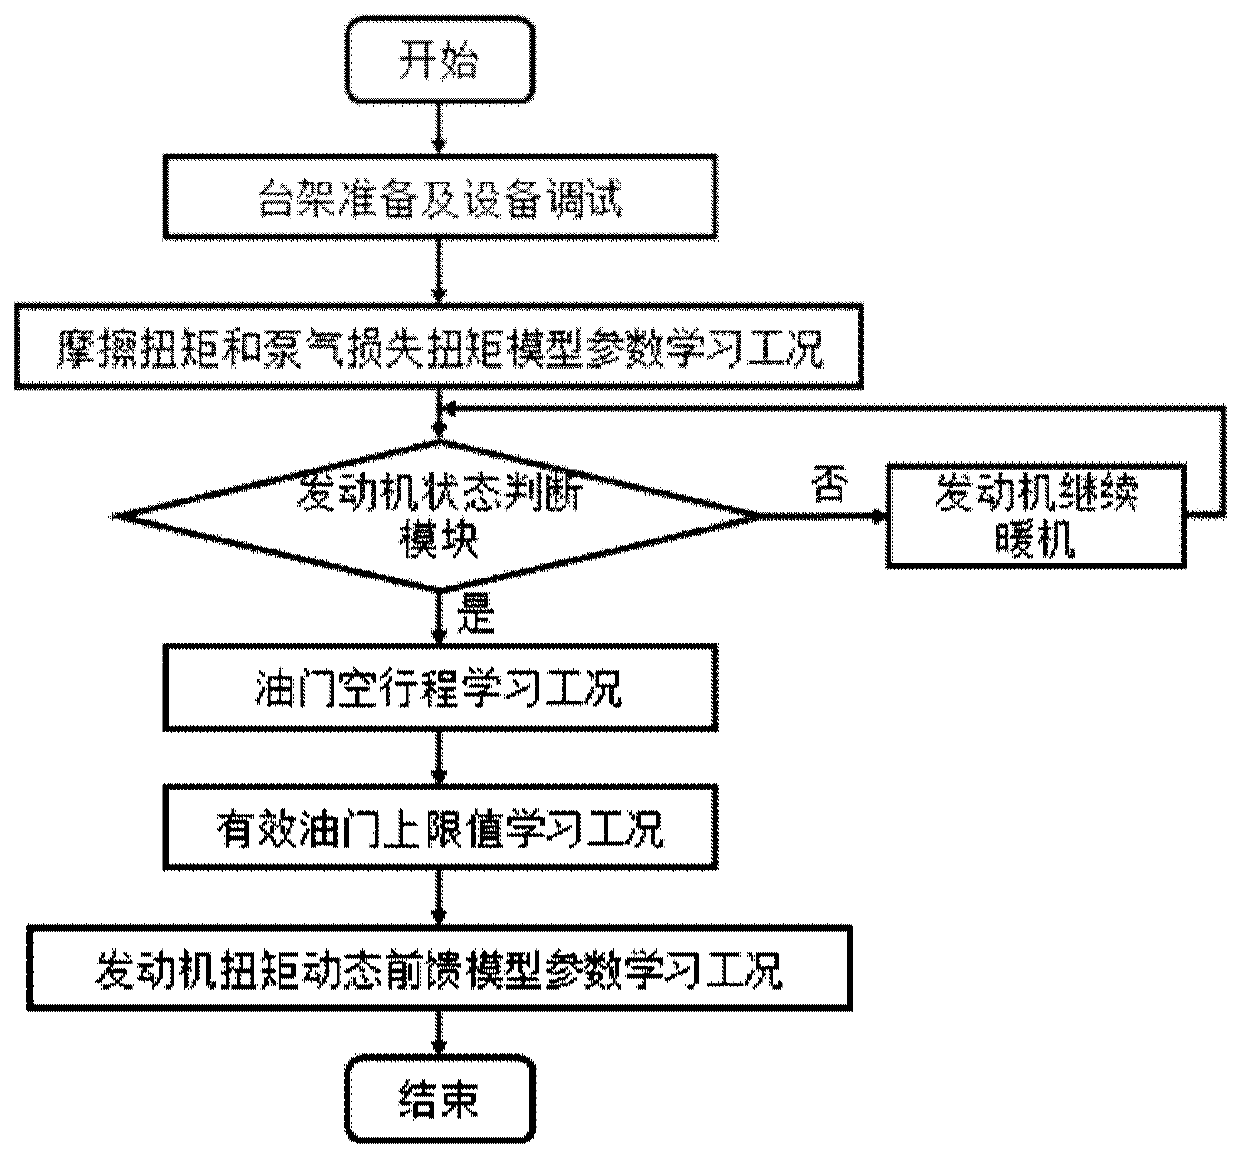 Self-learning Engine Torque Control System and Method Based on Disturbance Observation